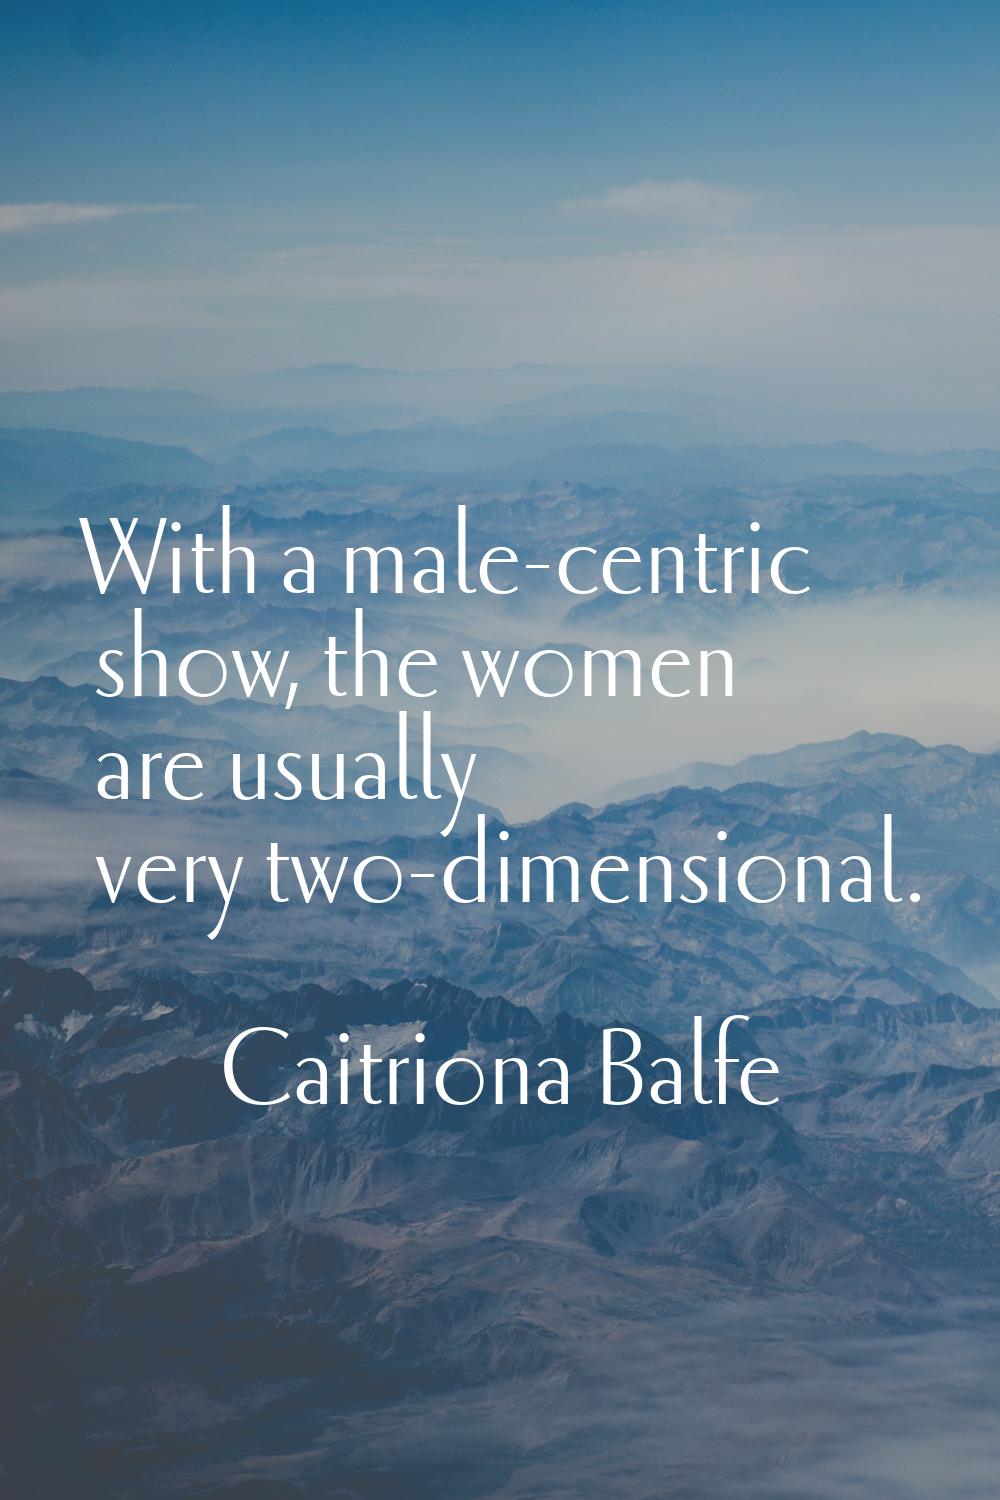 With a male-centric show, the women are usually very two-dimensional.